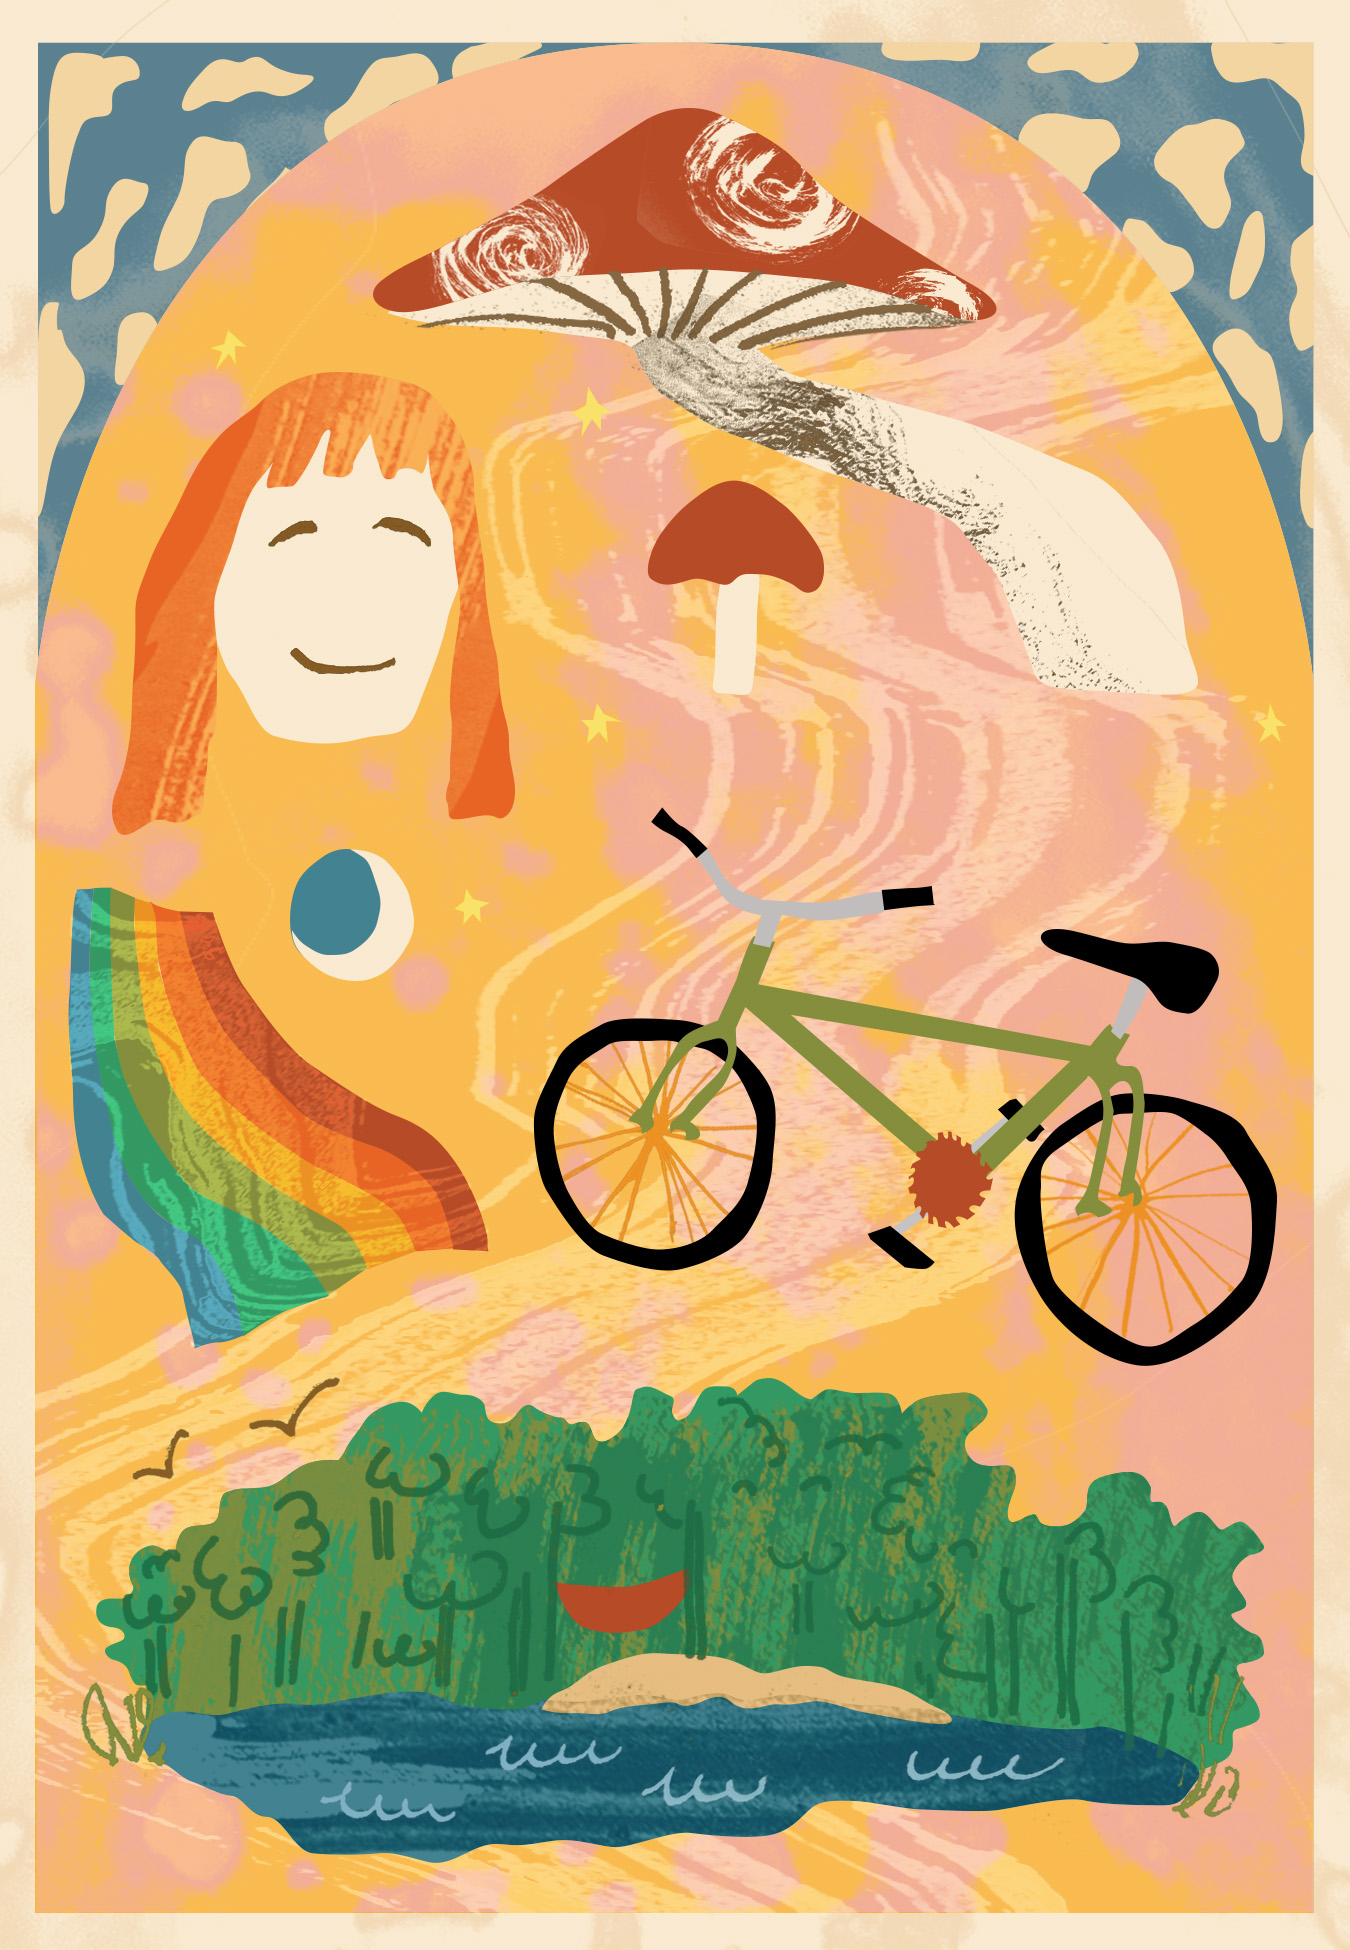 Illustrated image of a collage of mushroom, smiling girl, rainbow, bicycle, and a lake